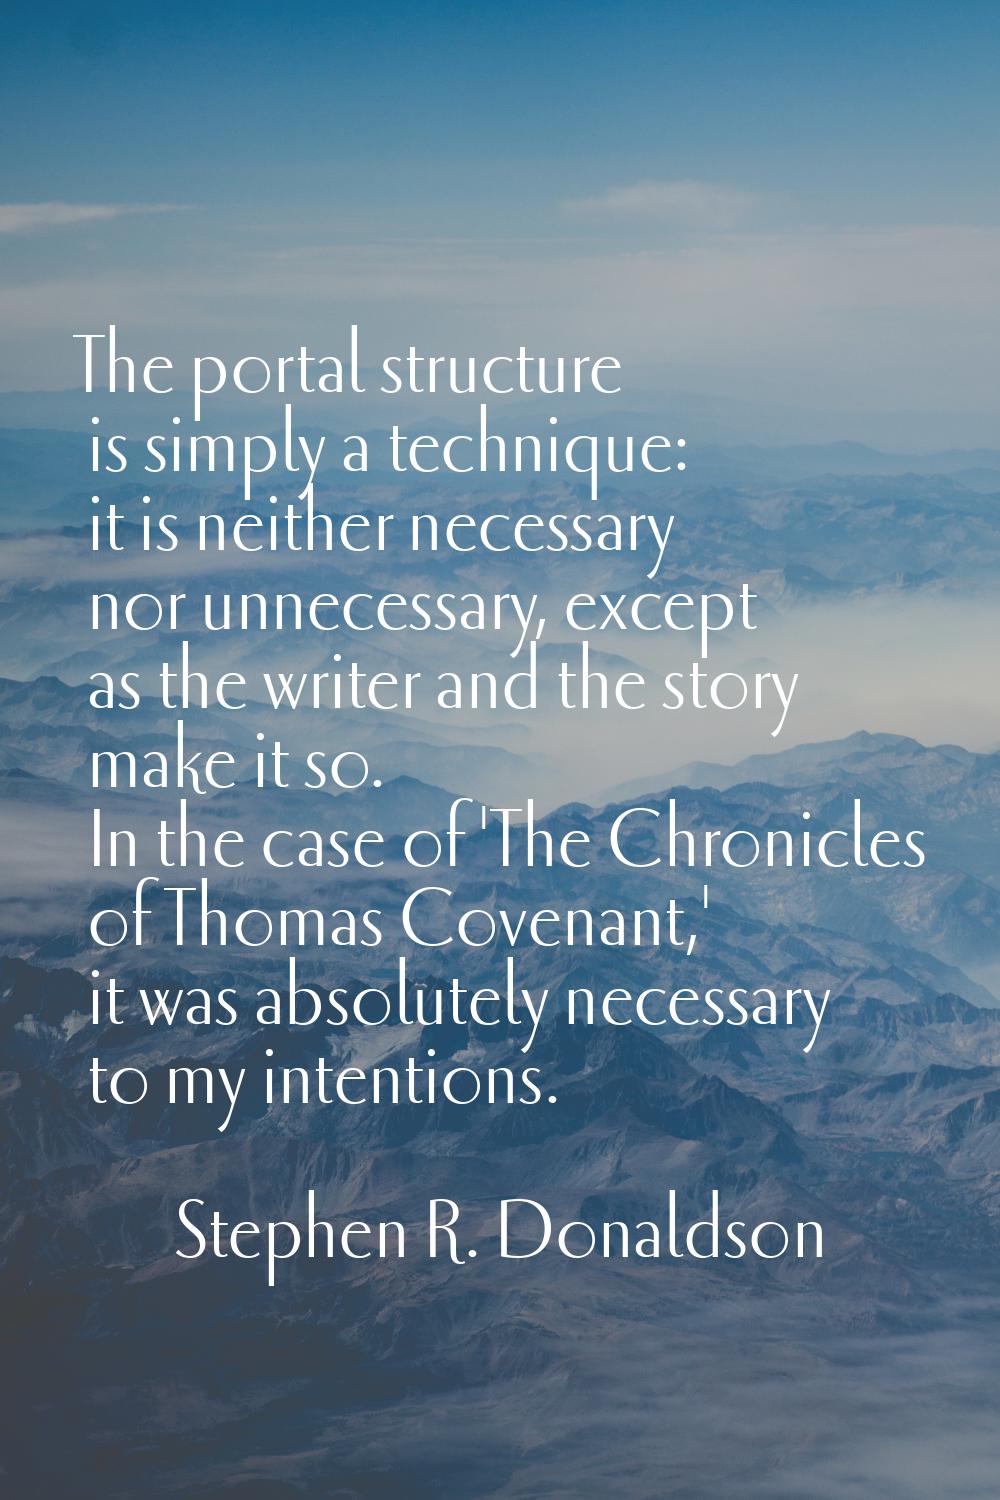 The portal structure is simply a technique: it is neither necessary nor unnecessary, except as the 